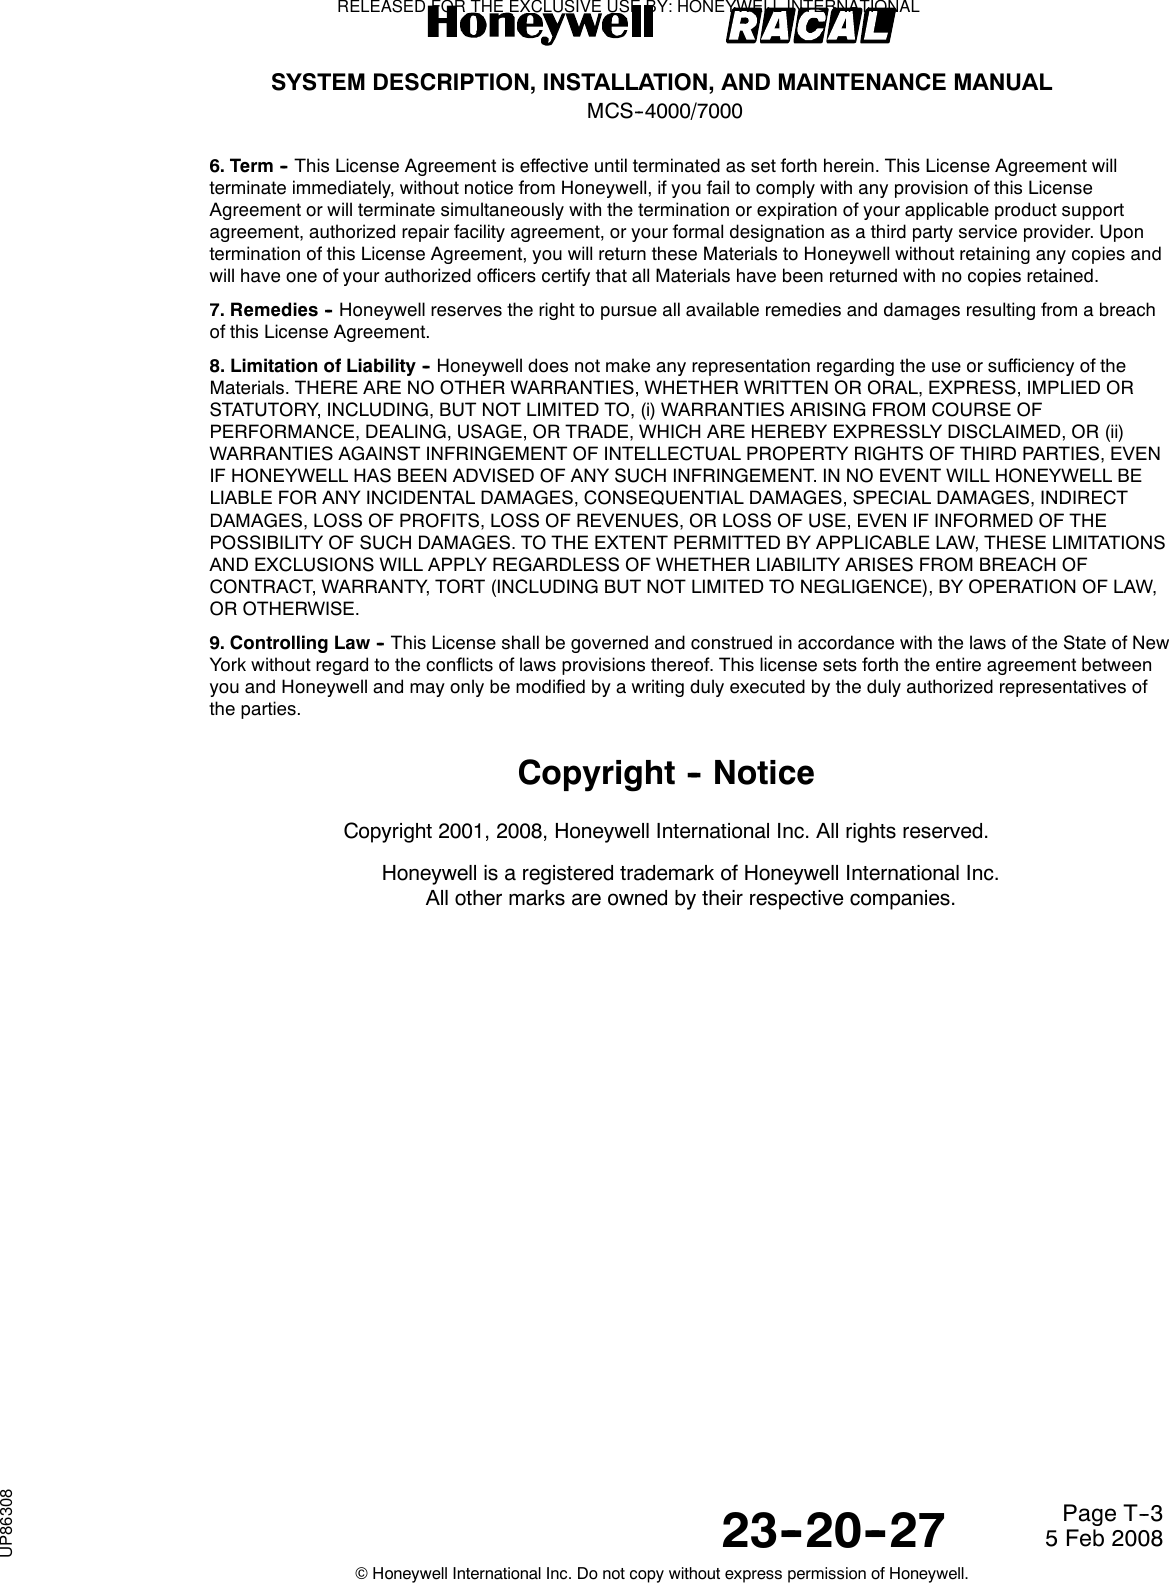 SYSTEM DESCRIPTION, INSTALLATION, AND MAINTENANCE MANUALMCS--4000/700023--20--27 5 Feb 2008©Honeywell International Inc. Do not copy without express permission of Honeywell.Page T--36. Term -- This License Agreement is effective until terminated as set forth herein. This License Agreement willterminate immediately, without notice from Honeywell, if you fail to comply with any provision of this LicenseAgreement or will terminate simultaneously with the termination or expiration of your applicable product supportagreement, authorized repair facility agreement, or your formal designation as a third party service provider. Upontermination of this License Agreement, you will return these Materials to Honeywell without retaining any copies andwill have one of your authorized officers certify that all Materials have been returned with no copies retained.7. Remedies -- Honeywell reserves the right to pursue all available remedies and damages resulting from a breachof this License Agreement.8. Limitation of Liability -- Honeywell does not make any representation regarding the use or sufficiency of theMaterials. THERE ARE NO OTHER WARRANTIES, WHETHER WRITTEN OR ORAL, EXPRESS, IMPLIED ORSTATUTORY, INCLUDING, BUT NOT LIMITED TO, (i) WARRANTIES ARISING FROM COURSE OFPERFORMANCE, DEALING, USAGE, OR TRADE, WHICH ARE HEREBY EXPRESSLY DISCLAIMED, OR (ii)WARRANTIES AGAINST INFRINGEMENT OF INTELLECTUAL PROPERTY RIGHTS OF THIRD PARTIES, EVENIF HONEYWELL HAS BEEN ADVISED OF ANY SUCH INFRINGEMENT. IN NO EVENT WILL HONEYWELL BELIABLE FOR ANY INCIDENTAL DAMAGES, CONSEQUENTIAL DAMAGES, SPECIAL DAMAGES, INDIRECTDAMAGES, LOSS OF PROFITS, LOSS OF REVENUES, OR LOSS OF USE, EVEN IF INFORMED OF THEPOSSIBILITY OF SUCH DAMAGES. TO THE EXTENT PERMITTED BY APPLICABLE LAW, THESE LIMITATIONSAND EXCLUSIONS WILL APPLY REGARDLESS OF WHETHER LIABILITY ARISES FROM BREACH OFCONTRACT, WARRANTY, TORT (INCLUDING BUT NOT LIMITED TO NEGLIGENCE), BY OPERATION OF LAW,OR OTHERWISE.9. Controlling Law -- This License shall be governed and construed in accordance with the laws of the State of NewYork without regard to the conflicts of laws provisions thereof. This license sets forth the entire agreement betweenyou and Honeywell and may only be modified by a writing duly executed by the duly authorized representatives ofthe parties.Copyright -- NoticeCopyright 2001, 2008, Honeywell International Inc. All rights reserved.Honeywell is a registered trademark of Honeywell International Inc.All other marks are owned by their respective companies.RELEASED FOR THE EXCLUSIVE USE BY: HONEYWELL INTERNATIONALUP86308